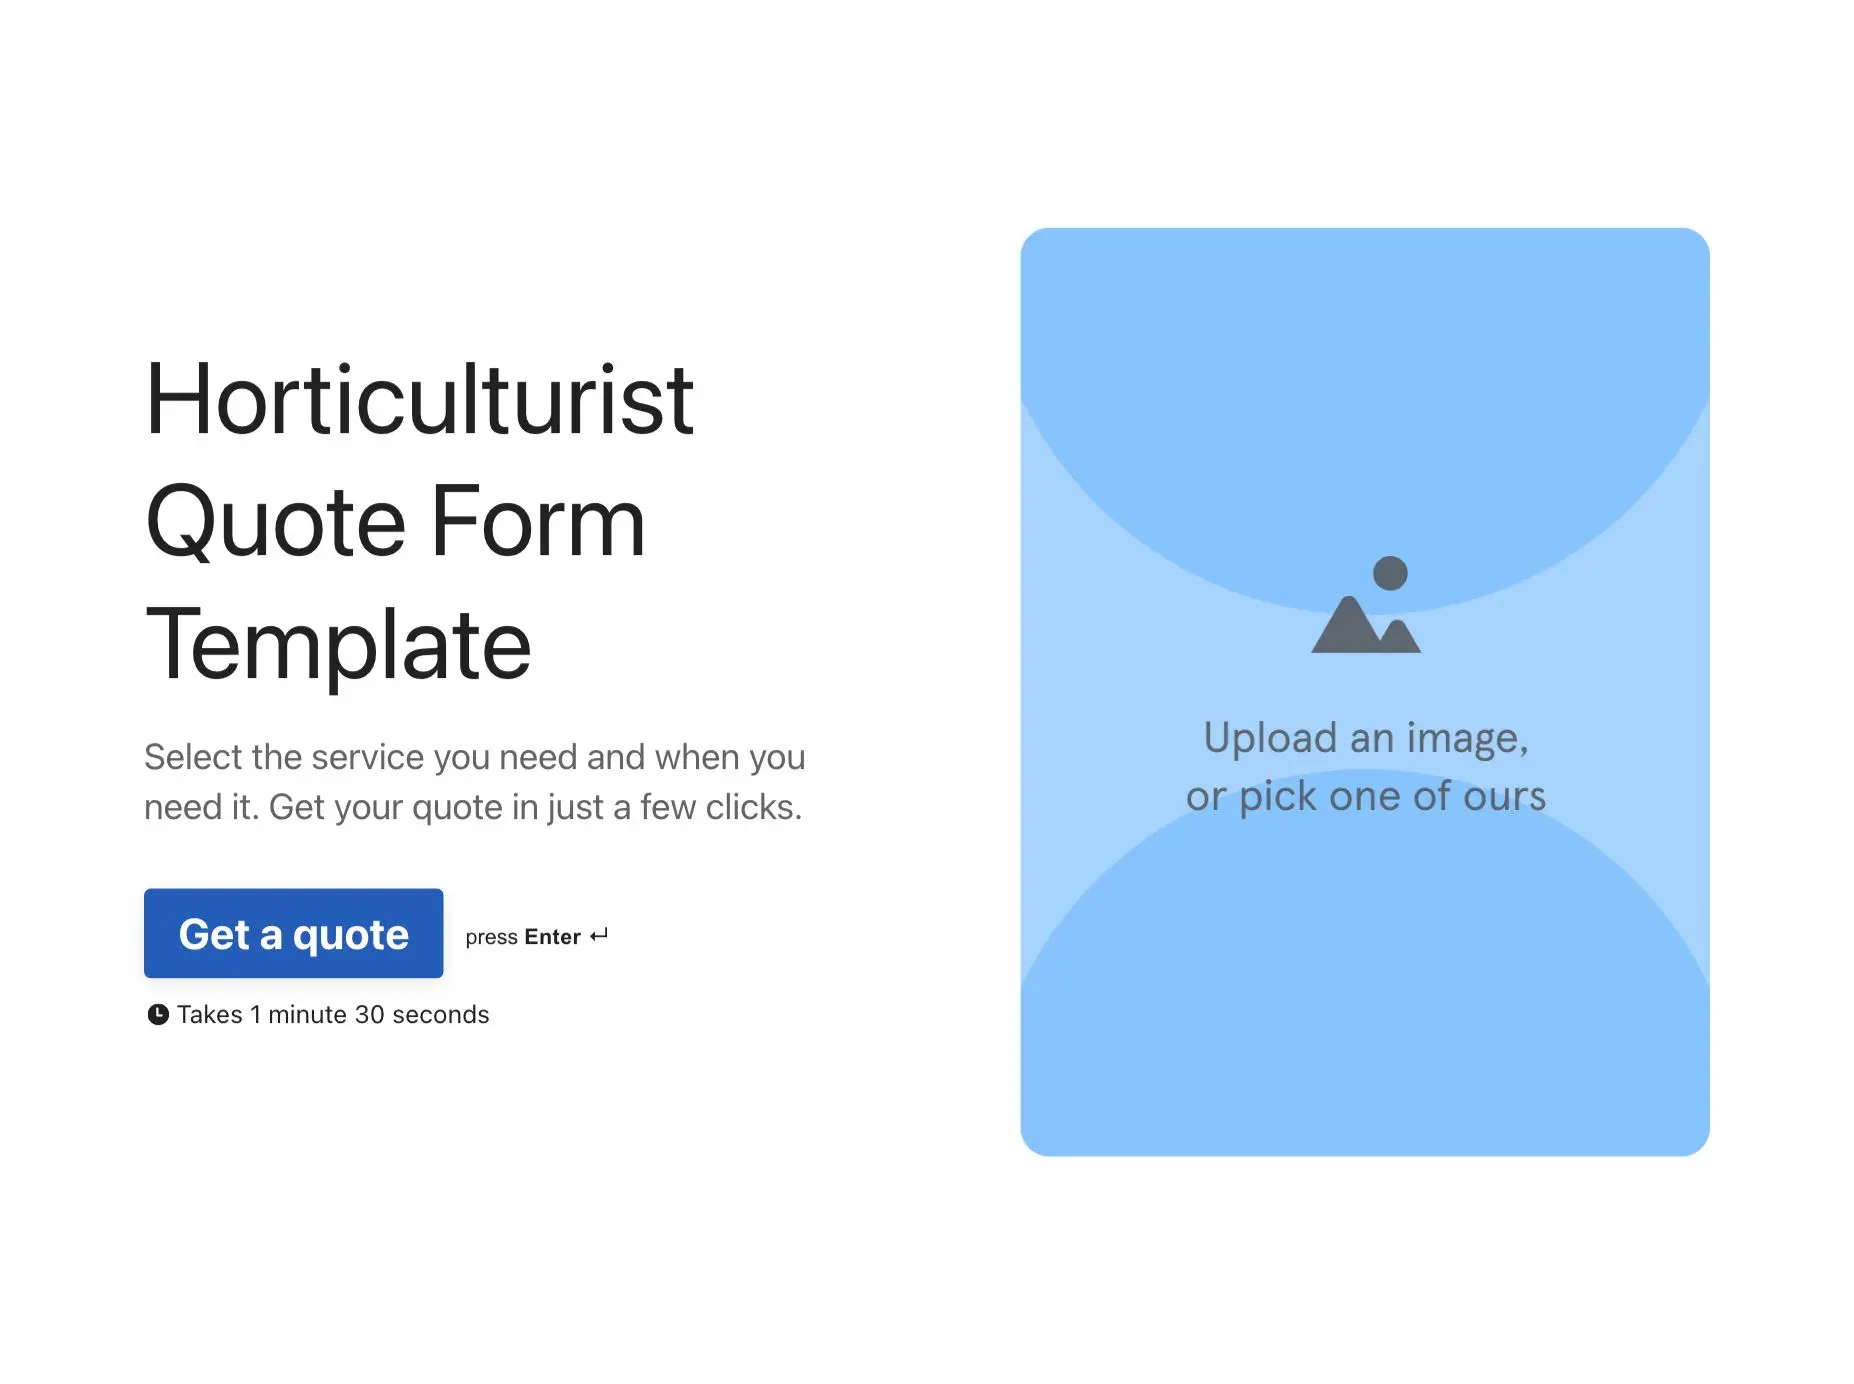 Horticulturist Quote Form Template Hero